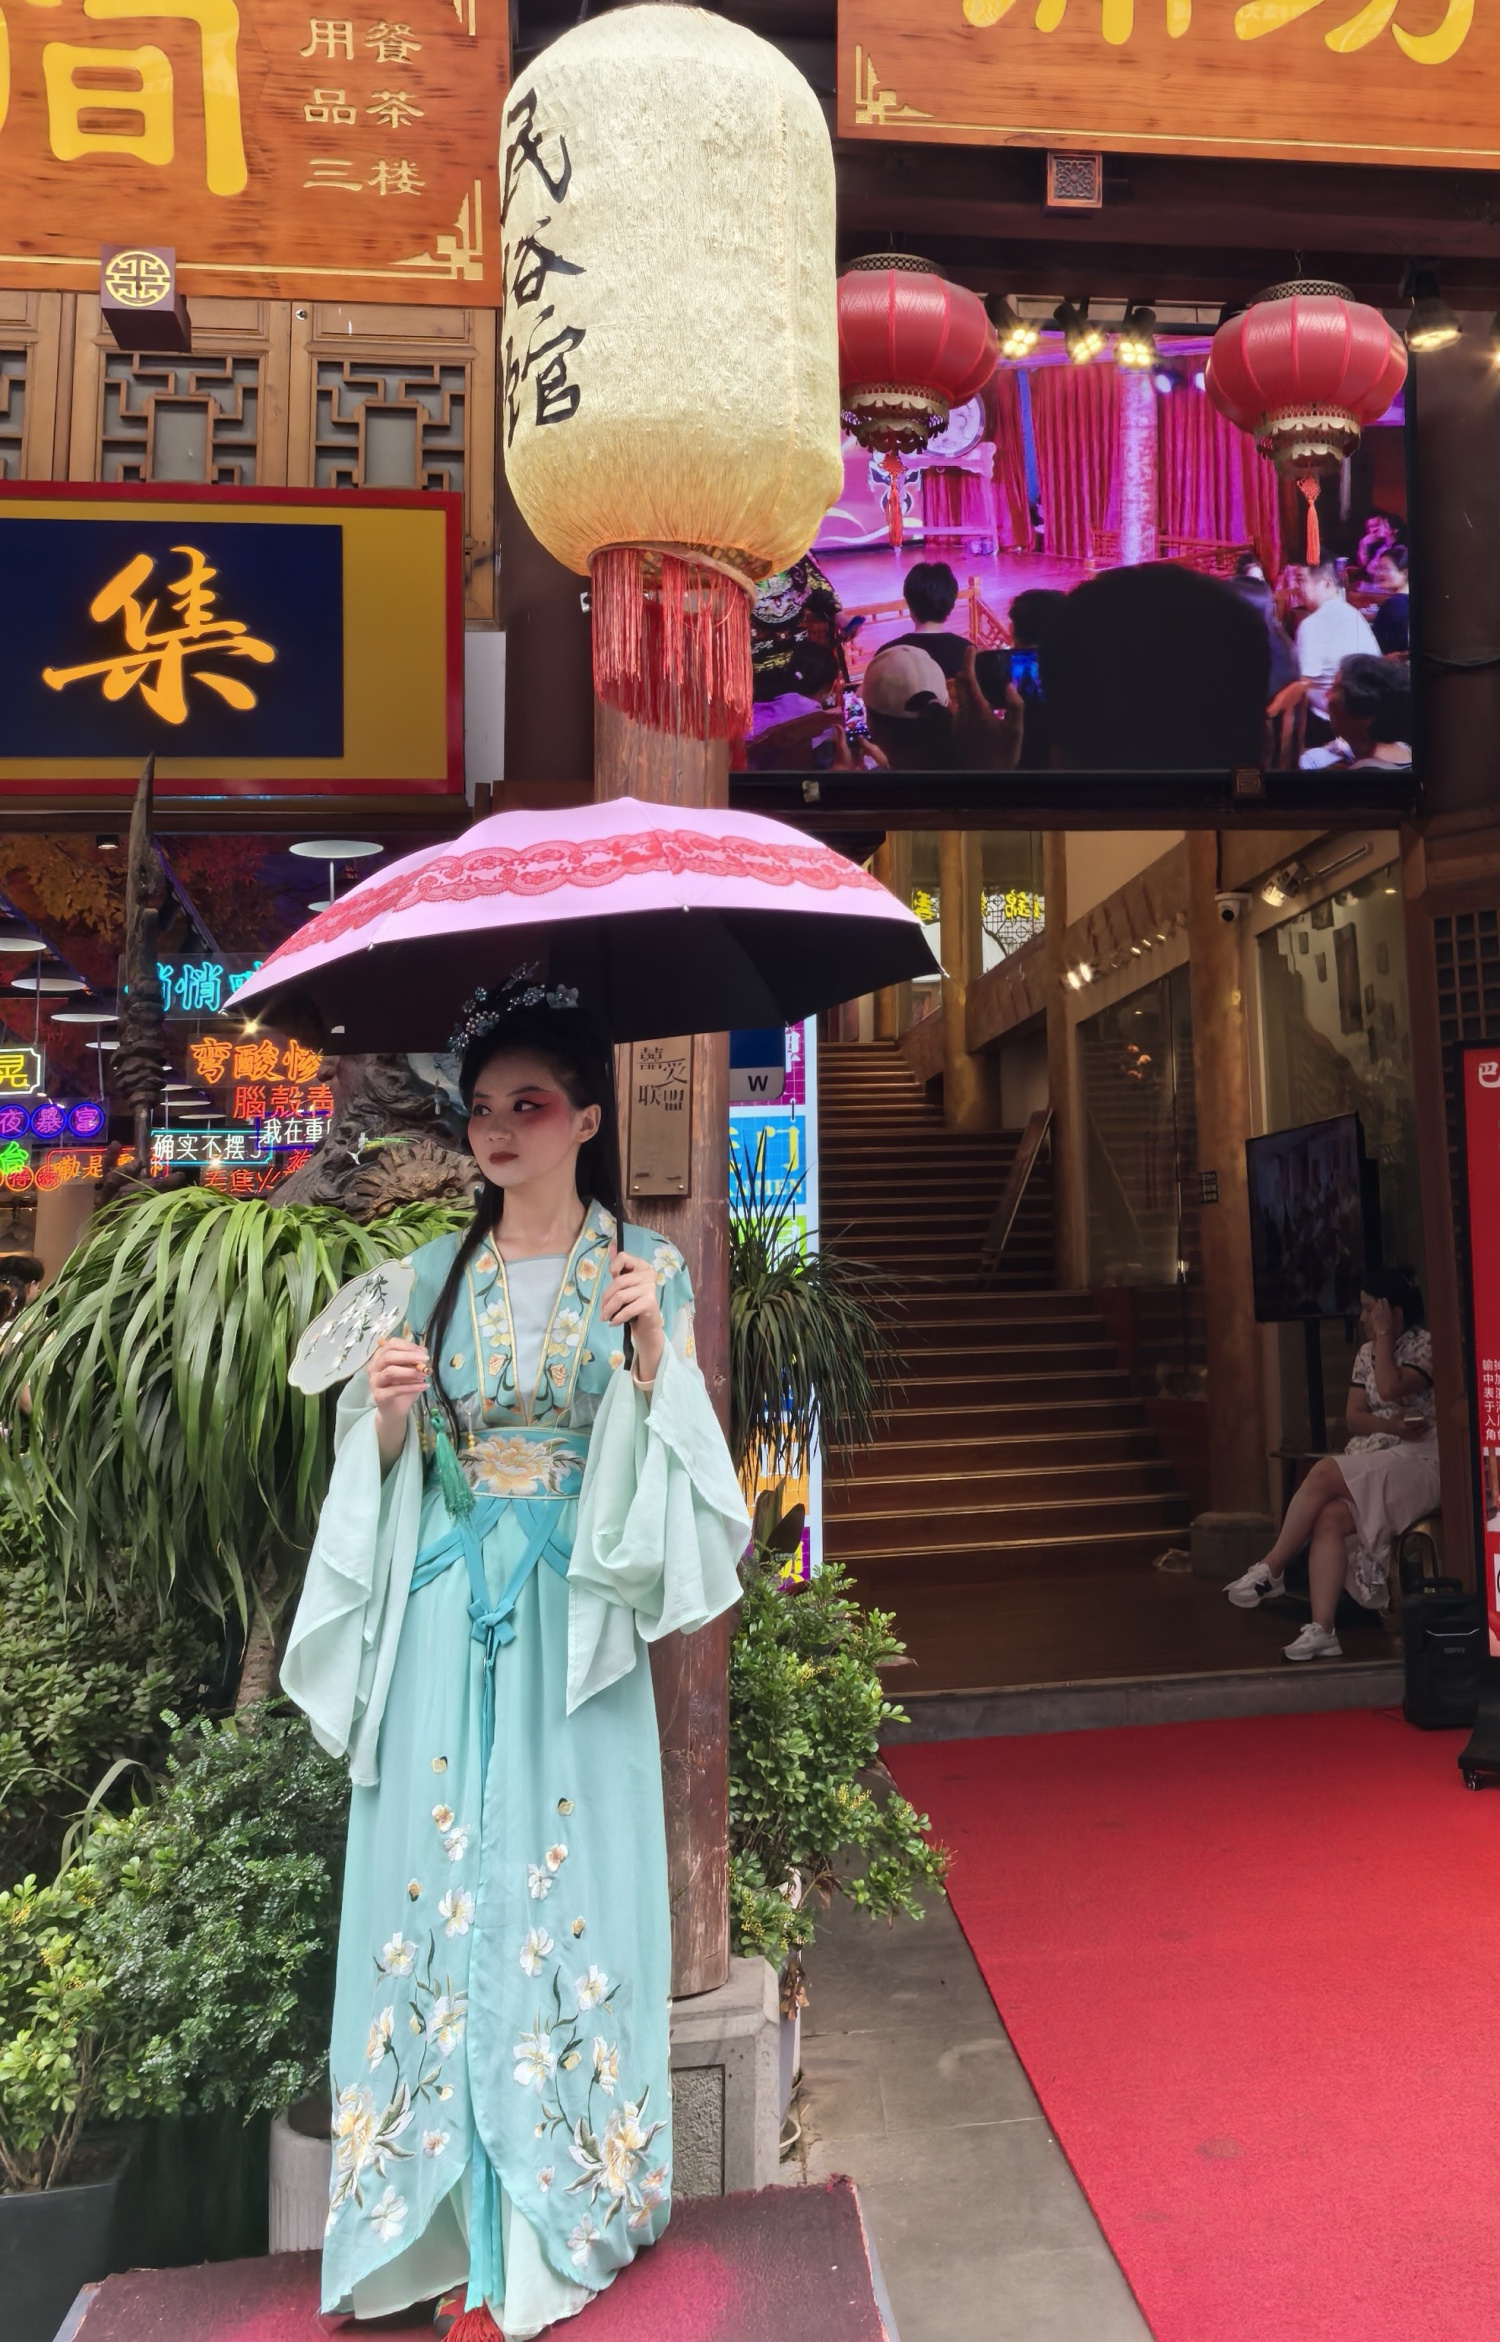 A woman in traditional Chinese attire stands on street to attract customers in Ciqikou ancient town, Chongqing, on July 10, 2024. /CGTN